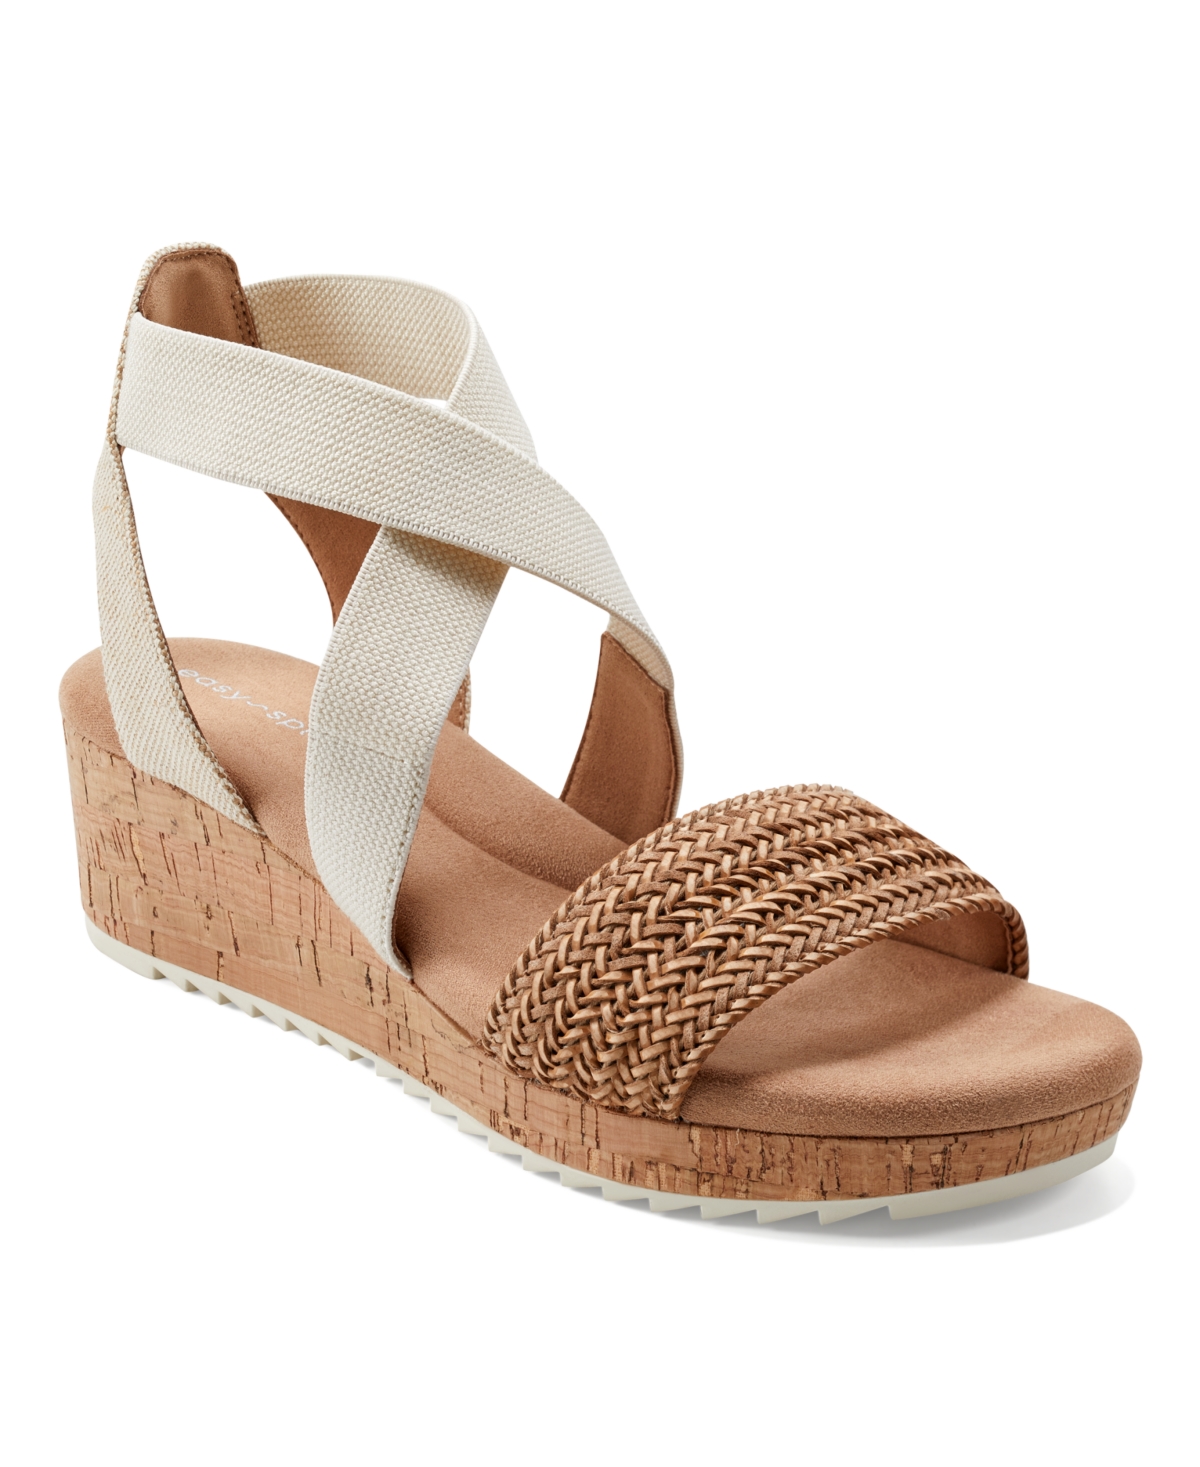 Women's Lorena Casual Strappy Wedge Sandals - Light Natural Multi - Textile, Manmade